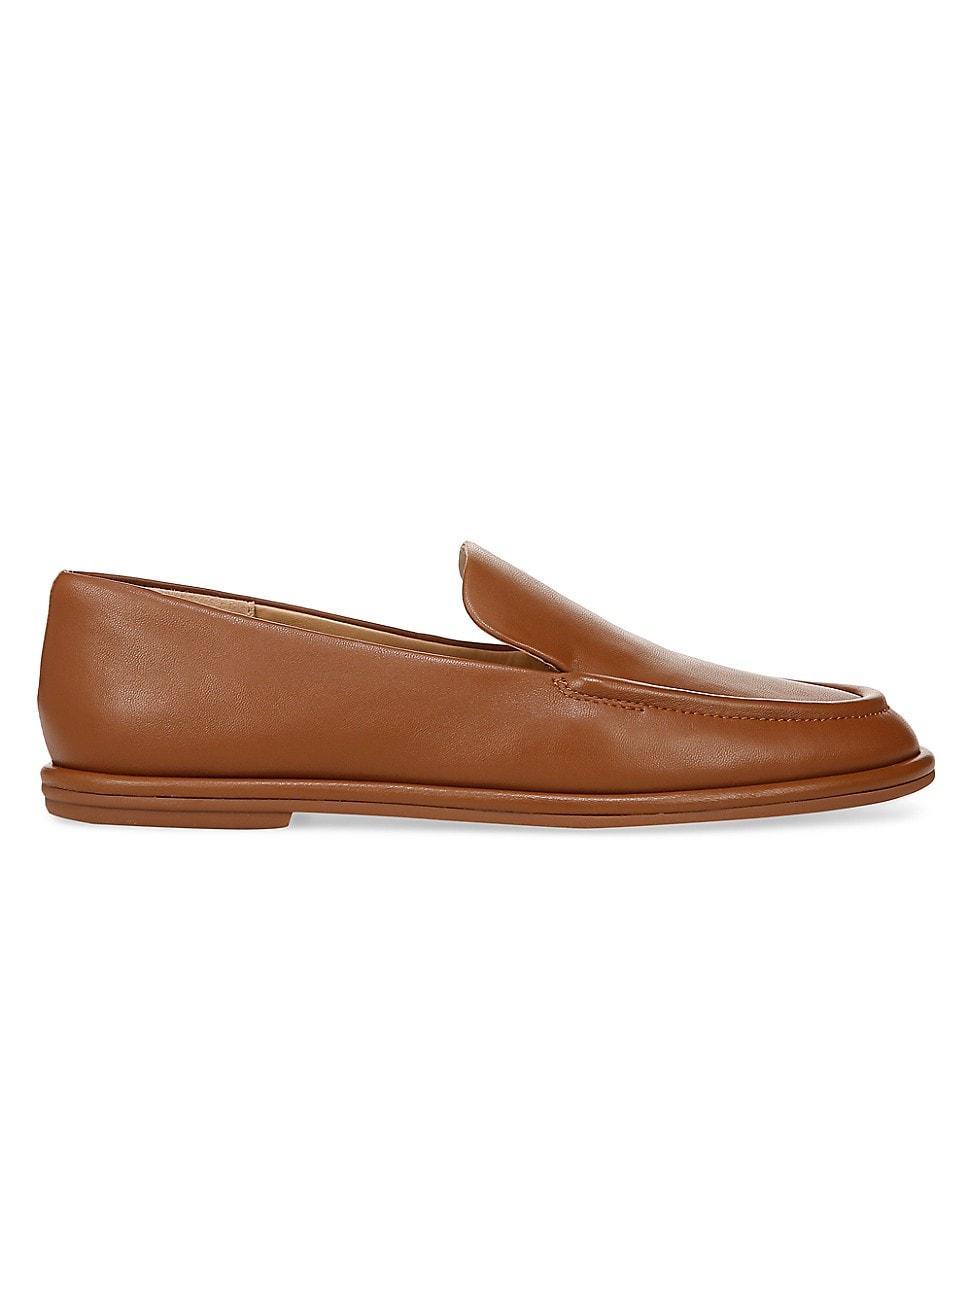 Womens Sloan Leather Loafers Product Image